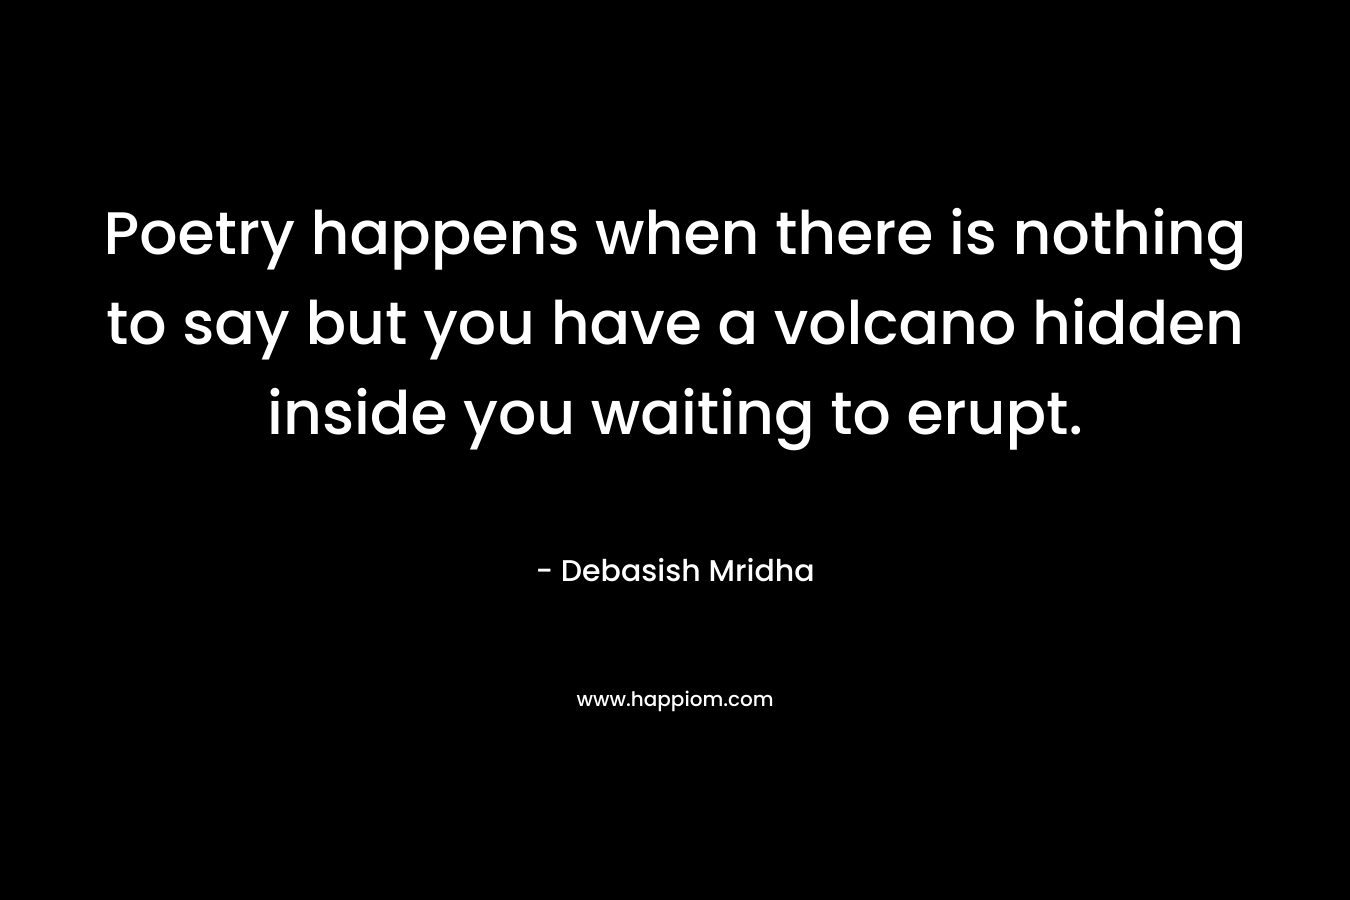 Poetry happens when there is nothing to say but you have a volcano hidden inside you waiting to erupt. – Debasish Mridha